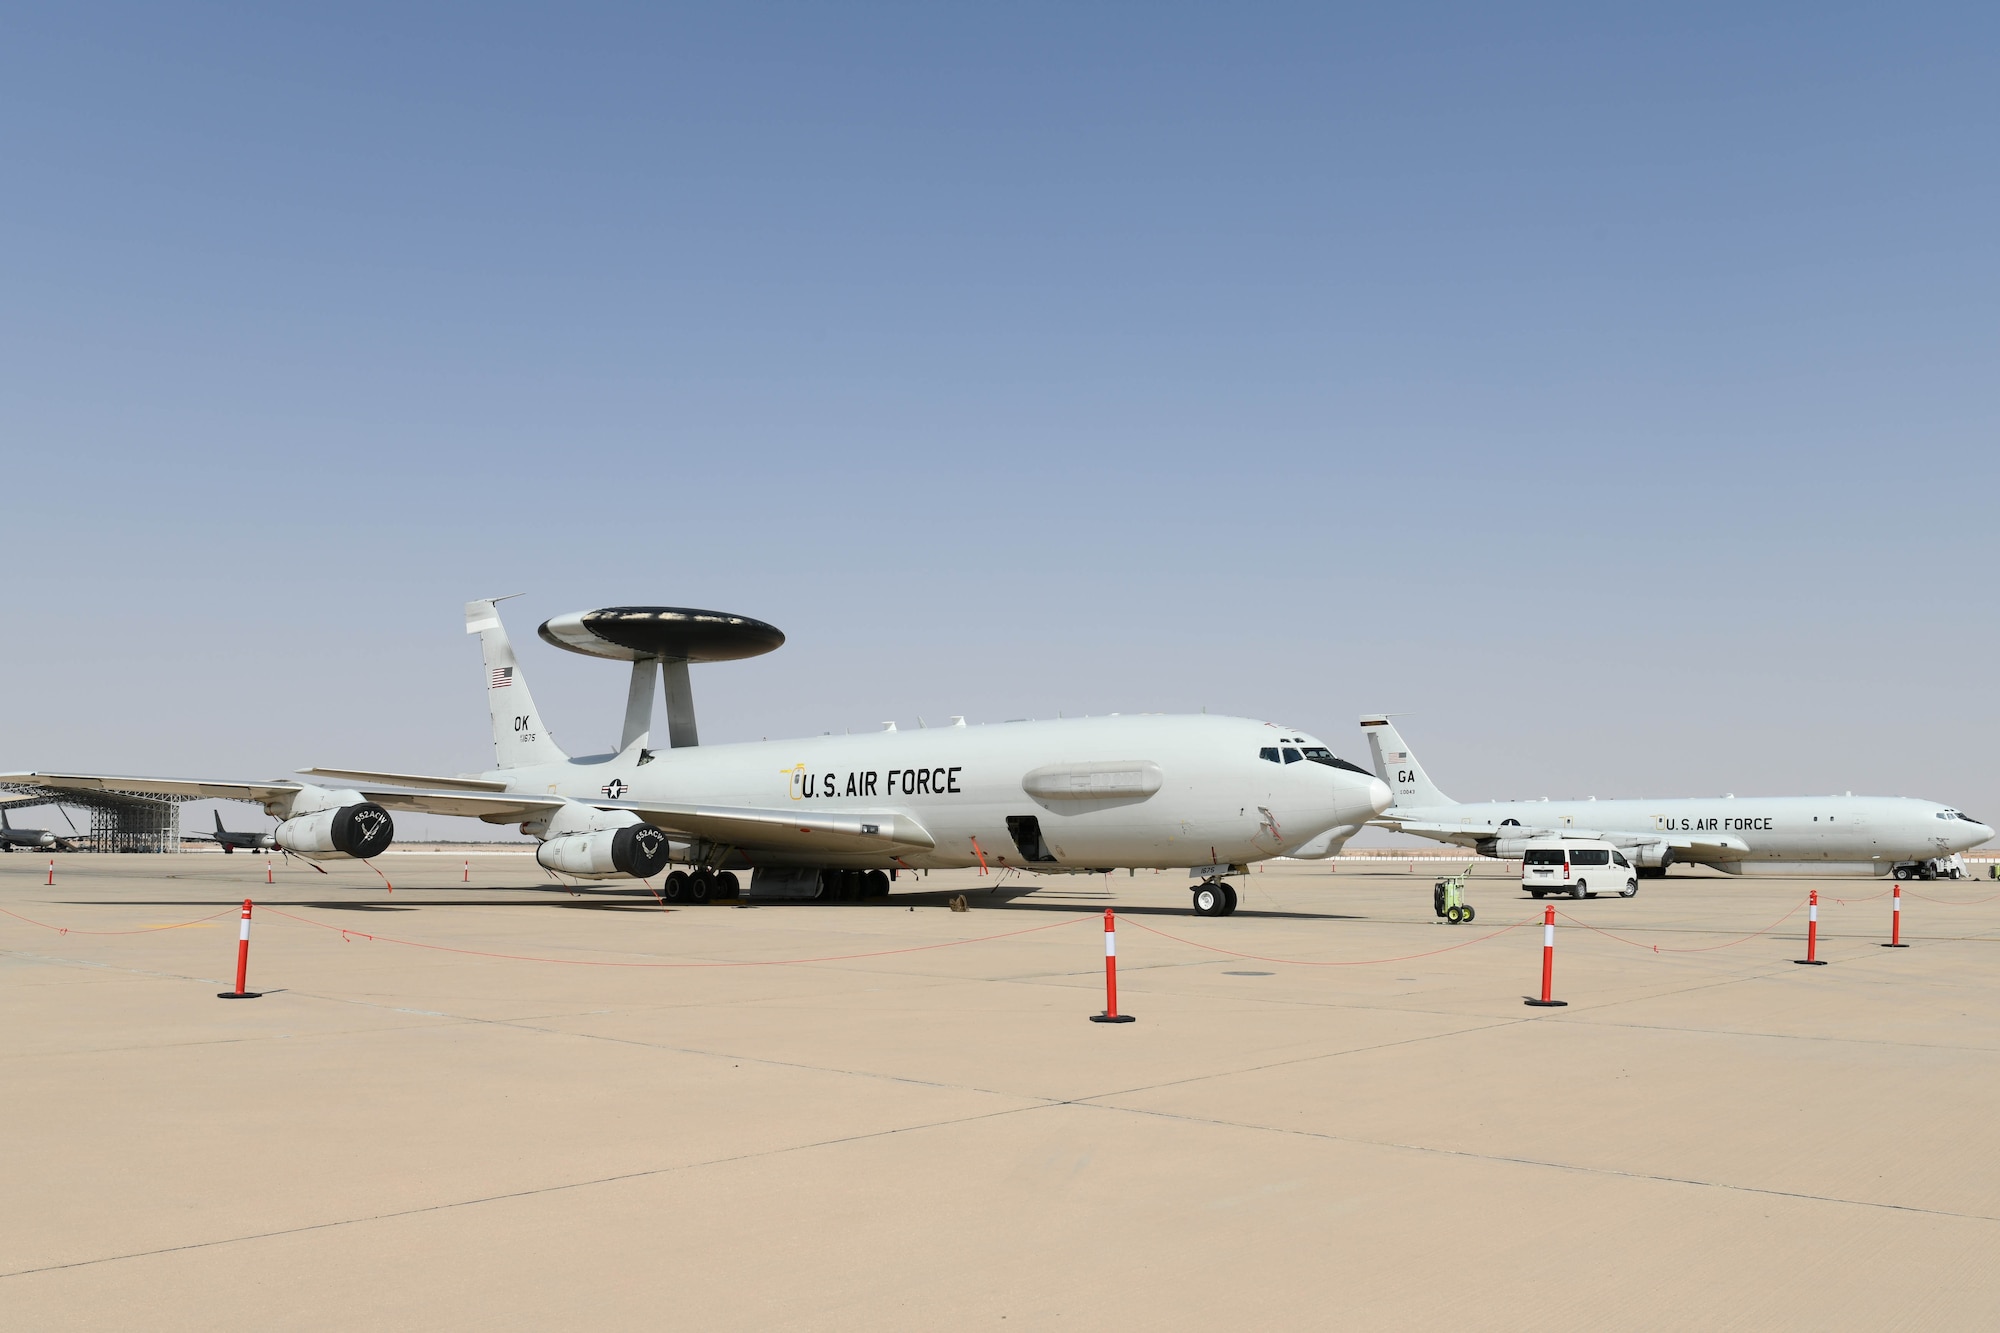 An E-3 Sentry (AWACS) and E-8C Joint Surveillance Target Attack Radar System aircraft sit on the flightline at Prince Sultan Air Base, Kingdom of Saudi Arabia, March 1, 2021.